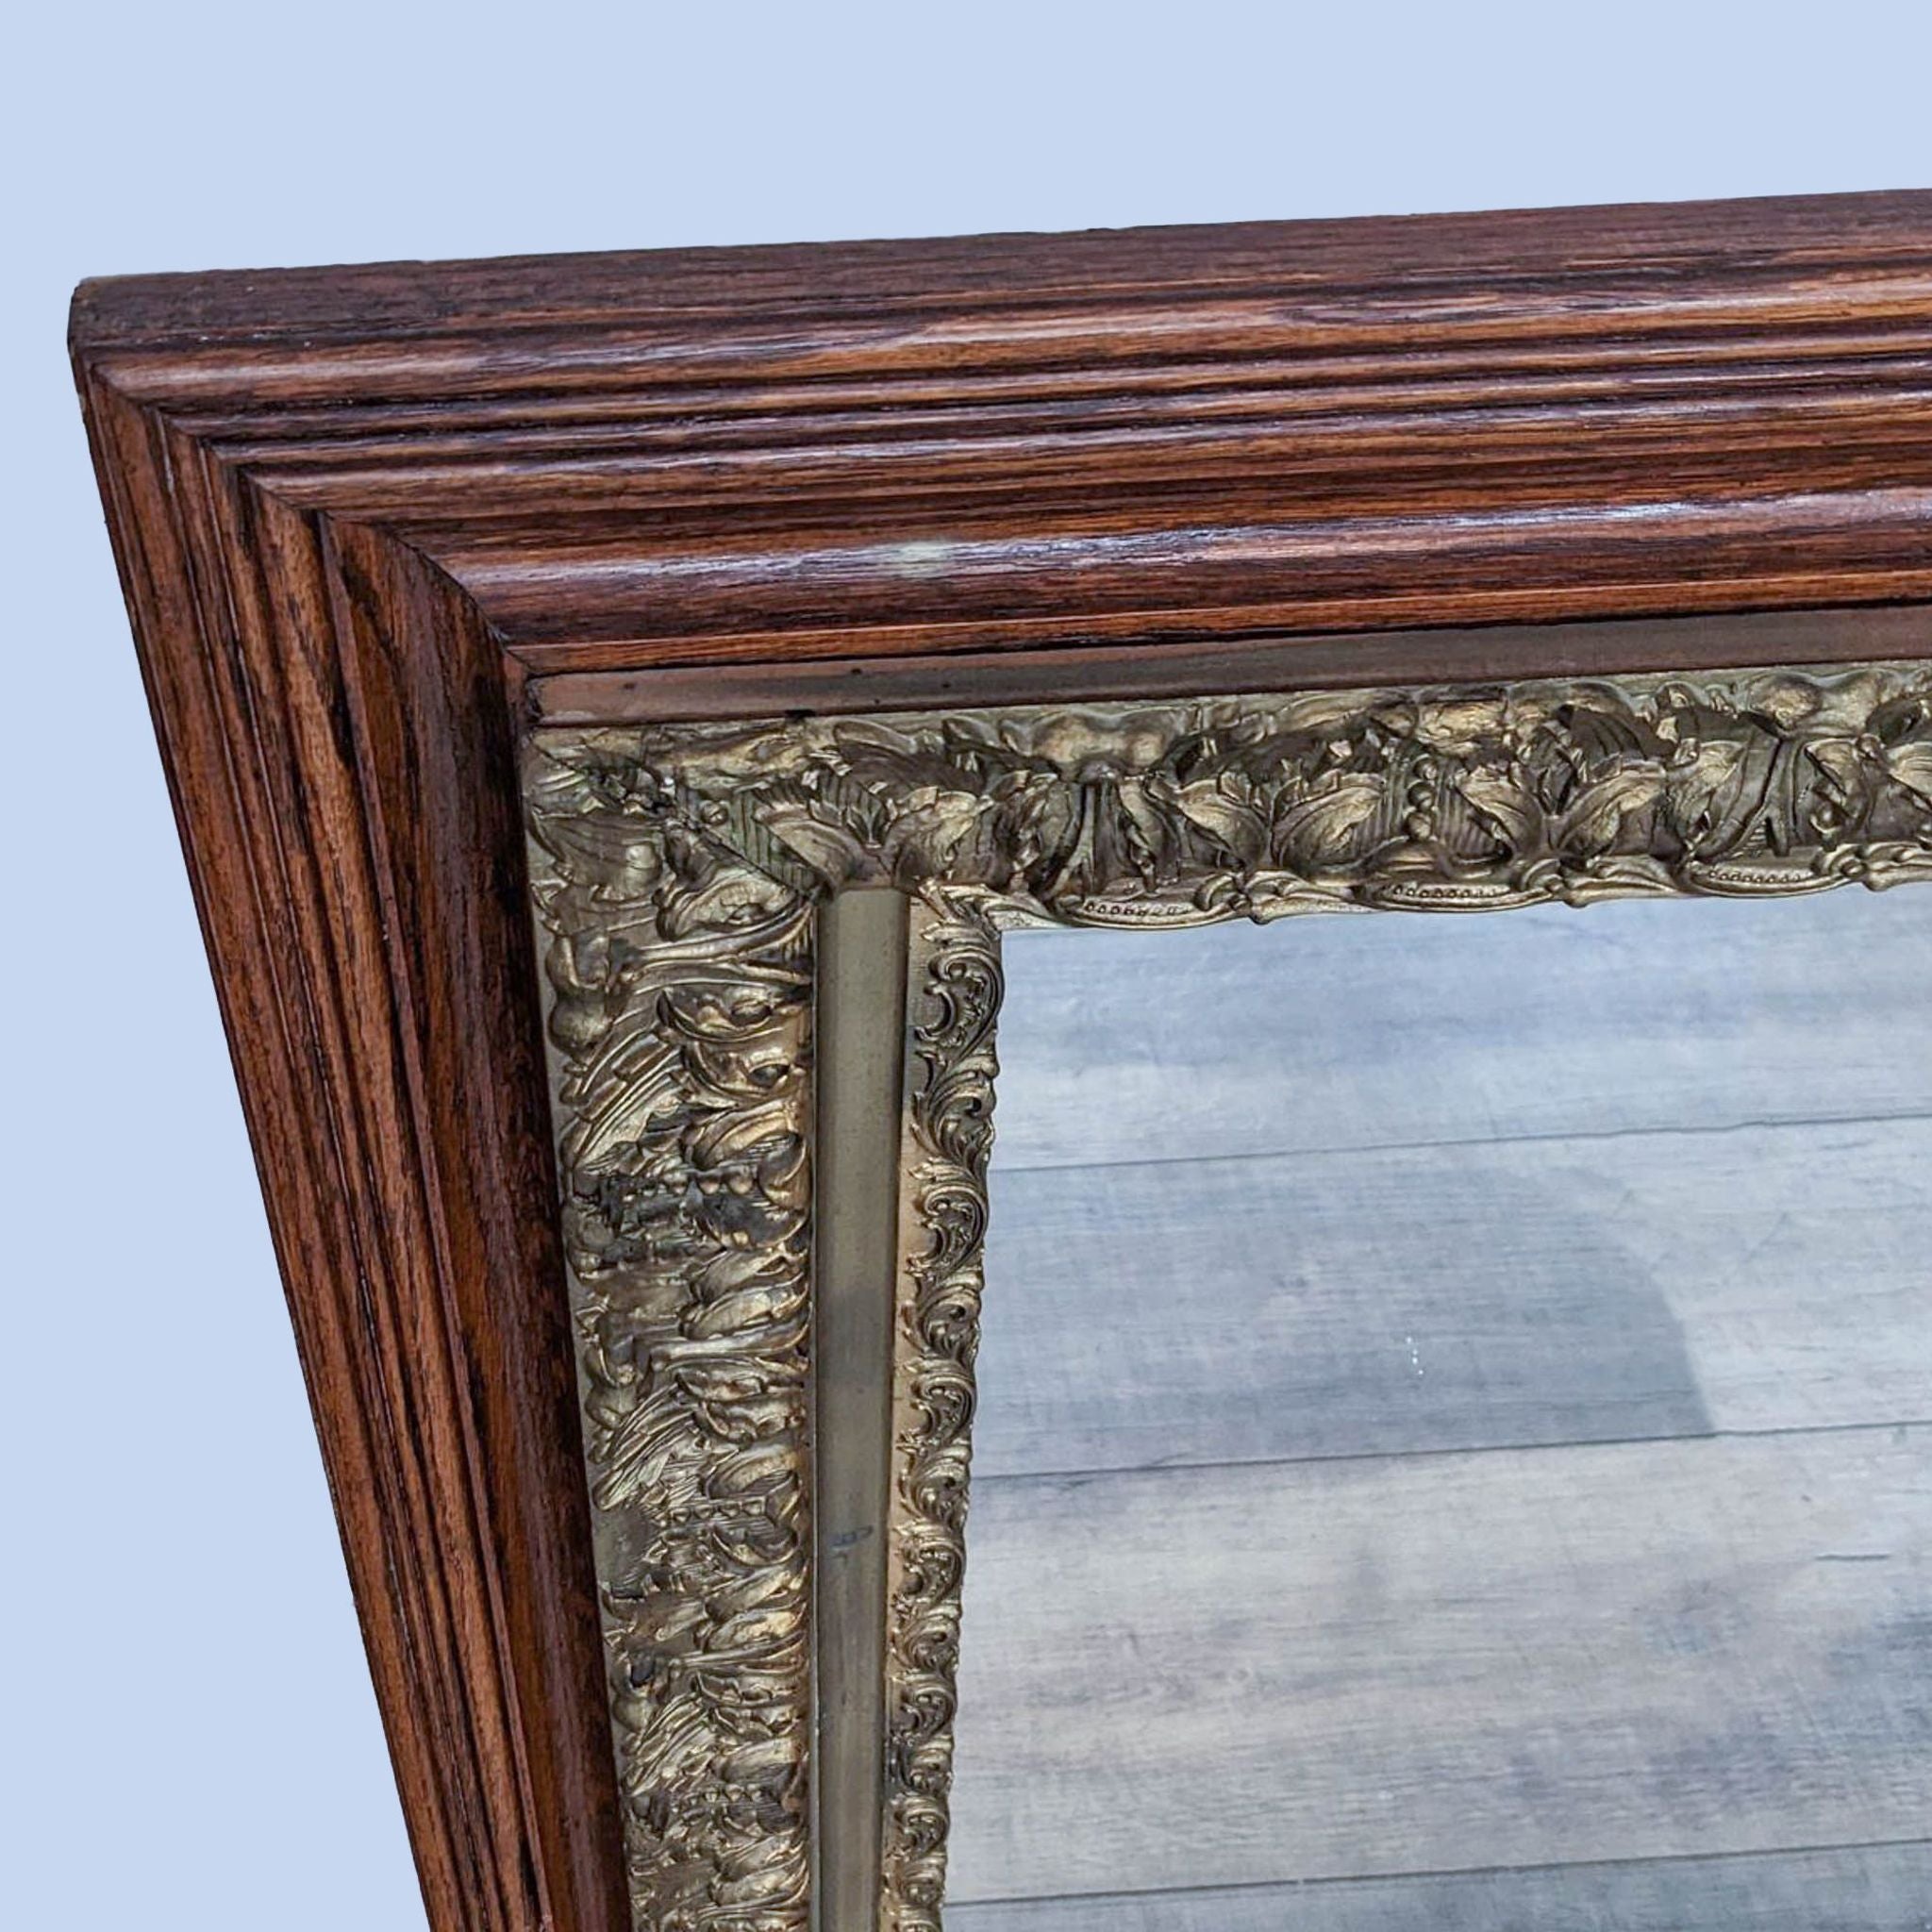 Classic square Reperch mirror featuring a richly ornamented wooden border and reflective glass on a wood-textured surface.